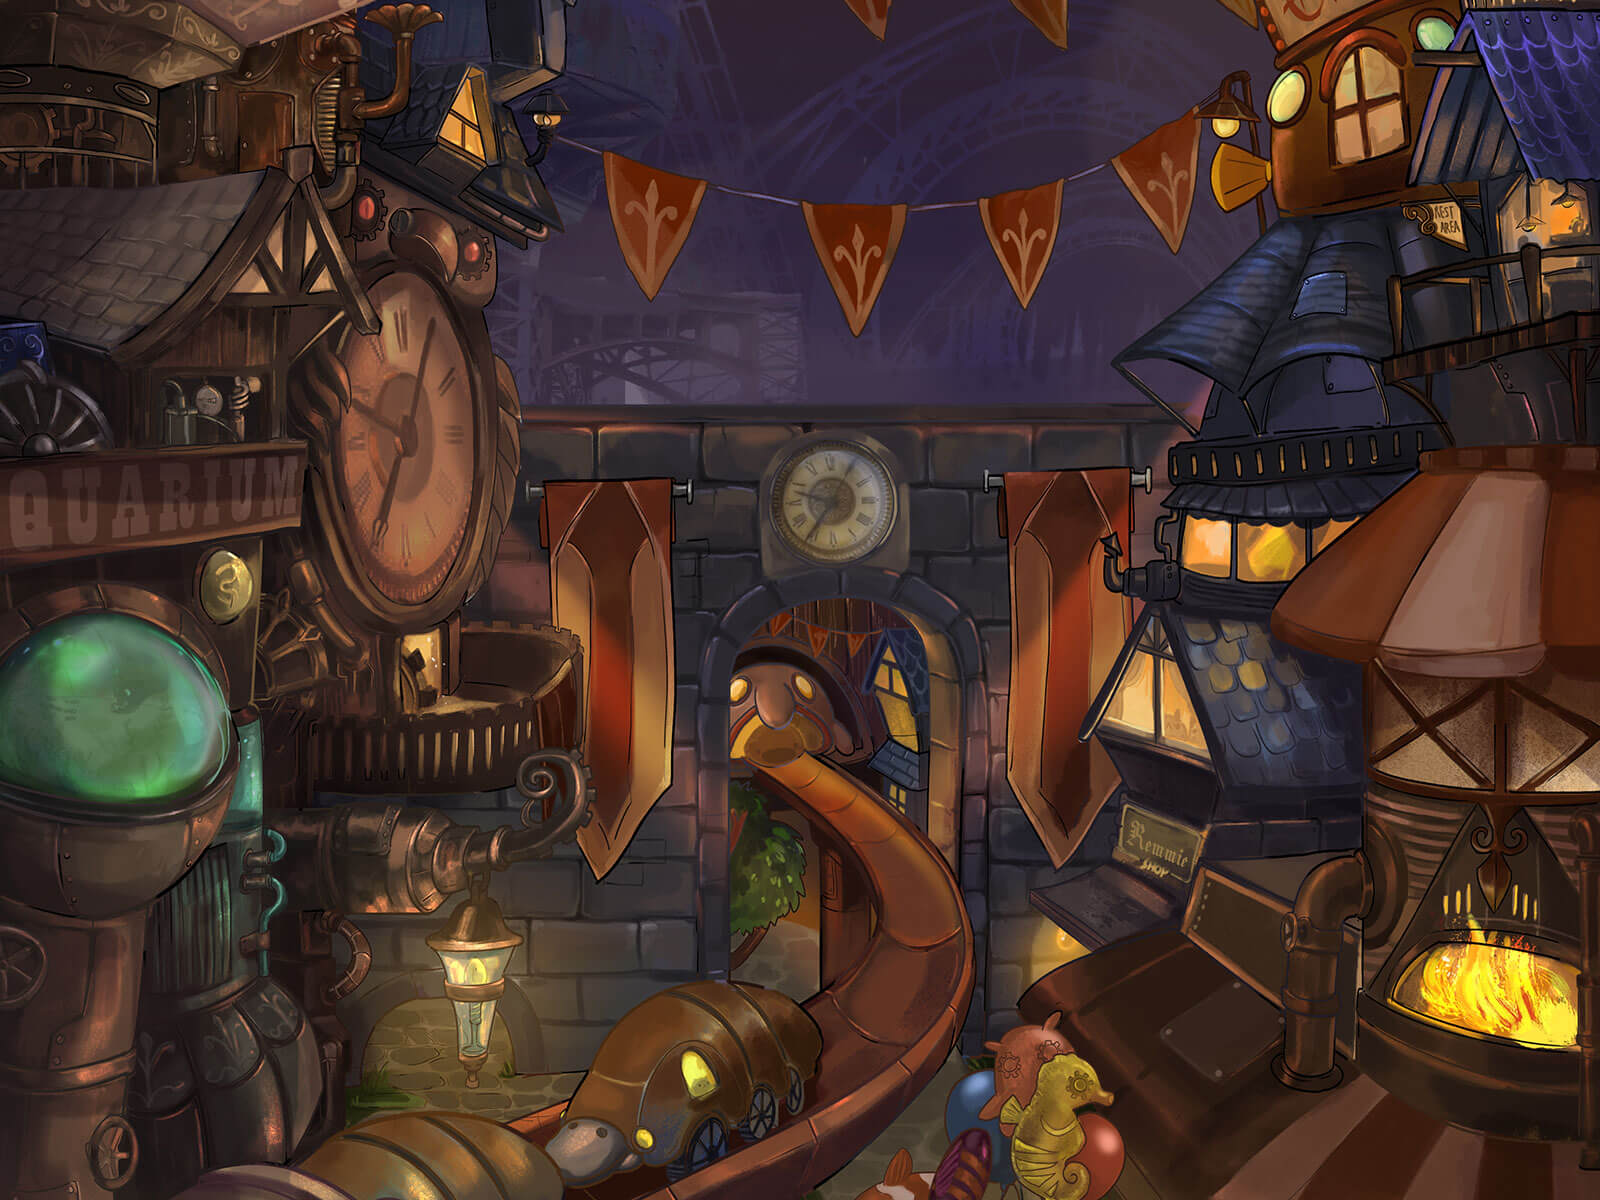 A lively, steampunk-style city scene at night.